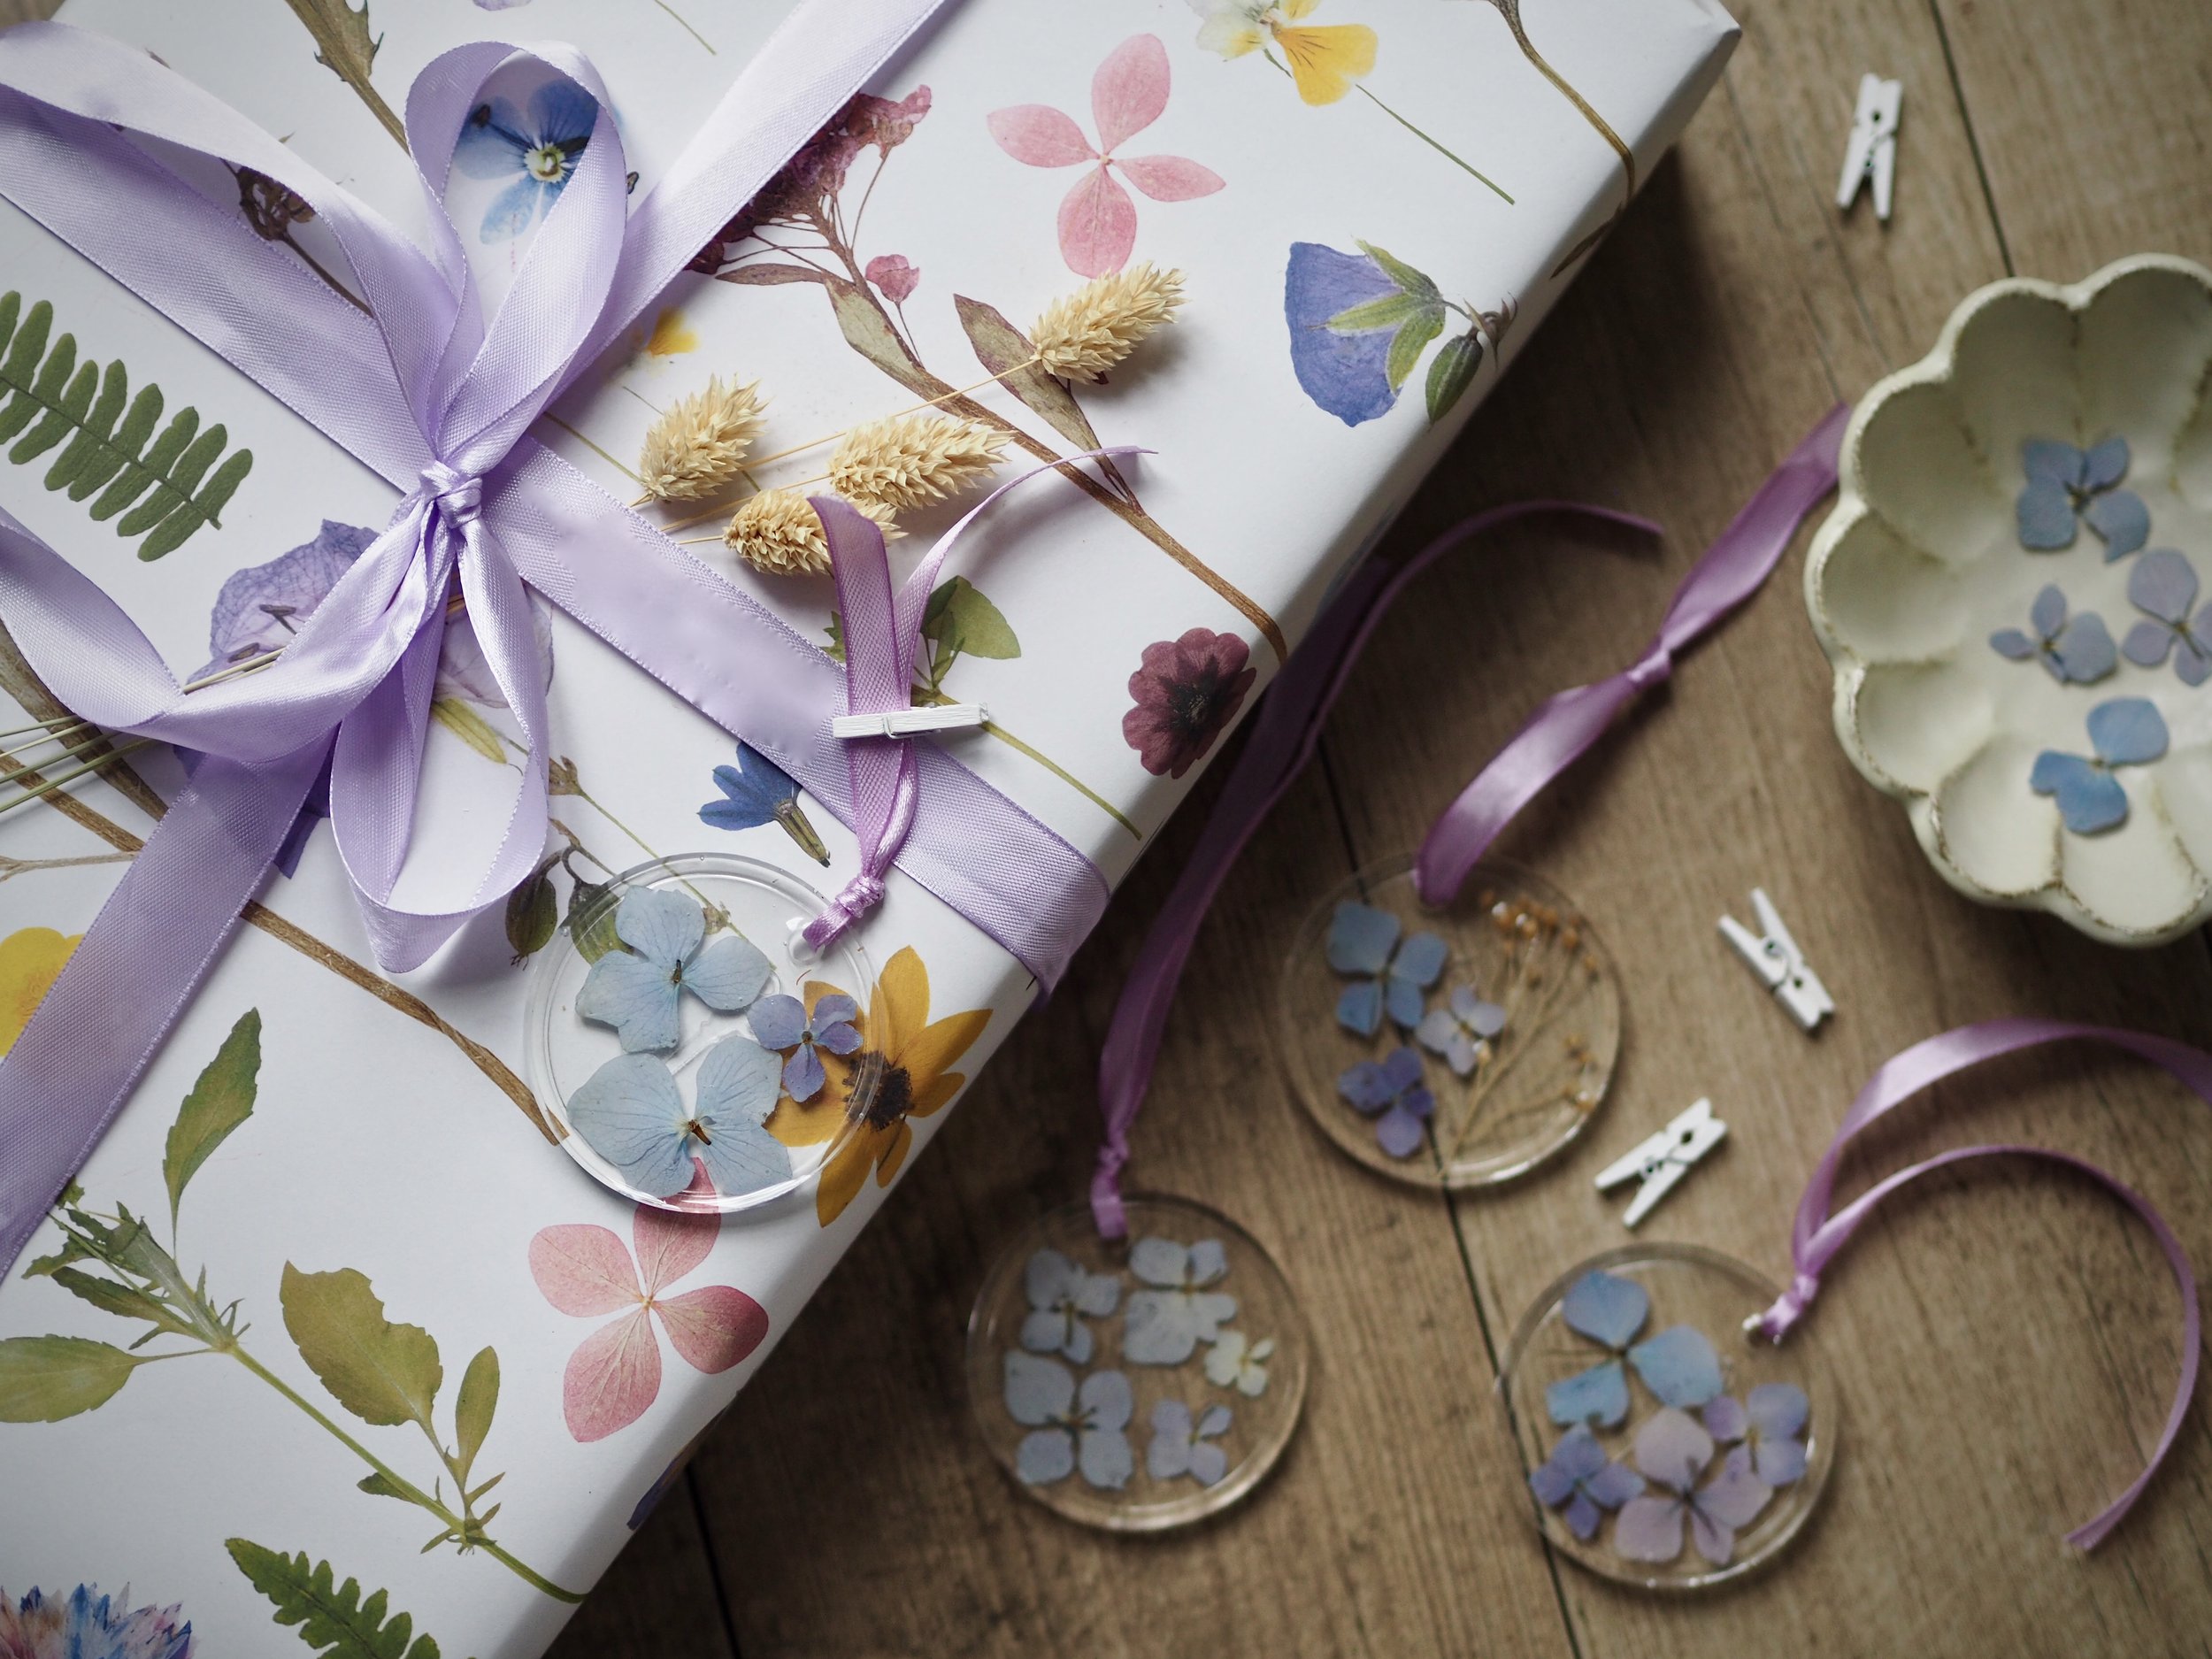 How To Make These Cute Pressed Flower Resin Craft Hanging Decorations —  MELANIE LISSACK INTERIORS